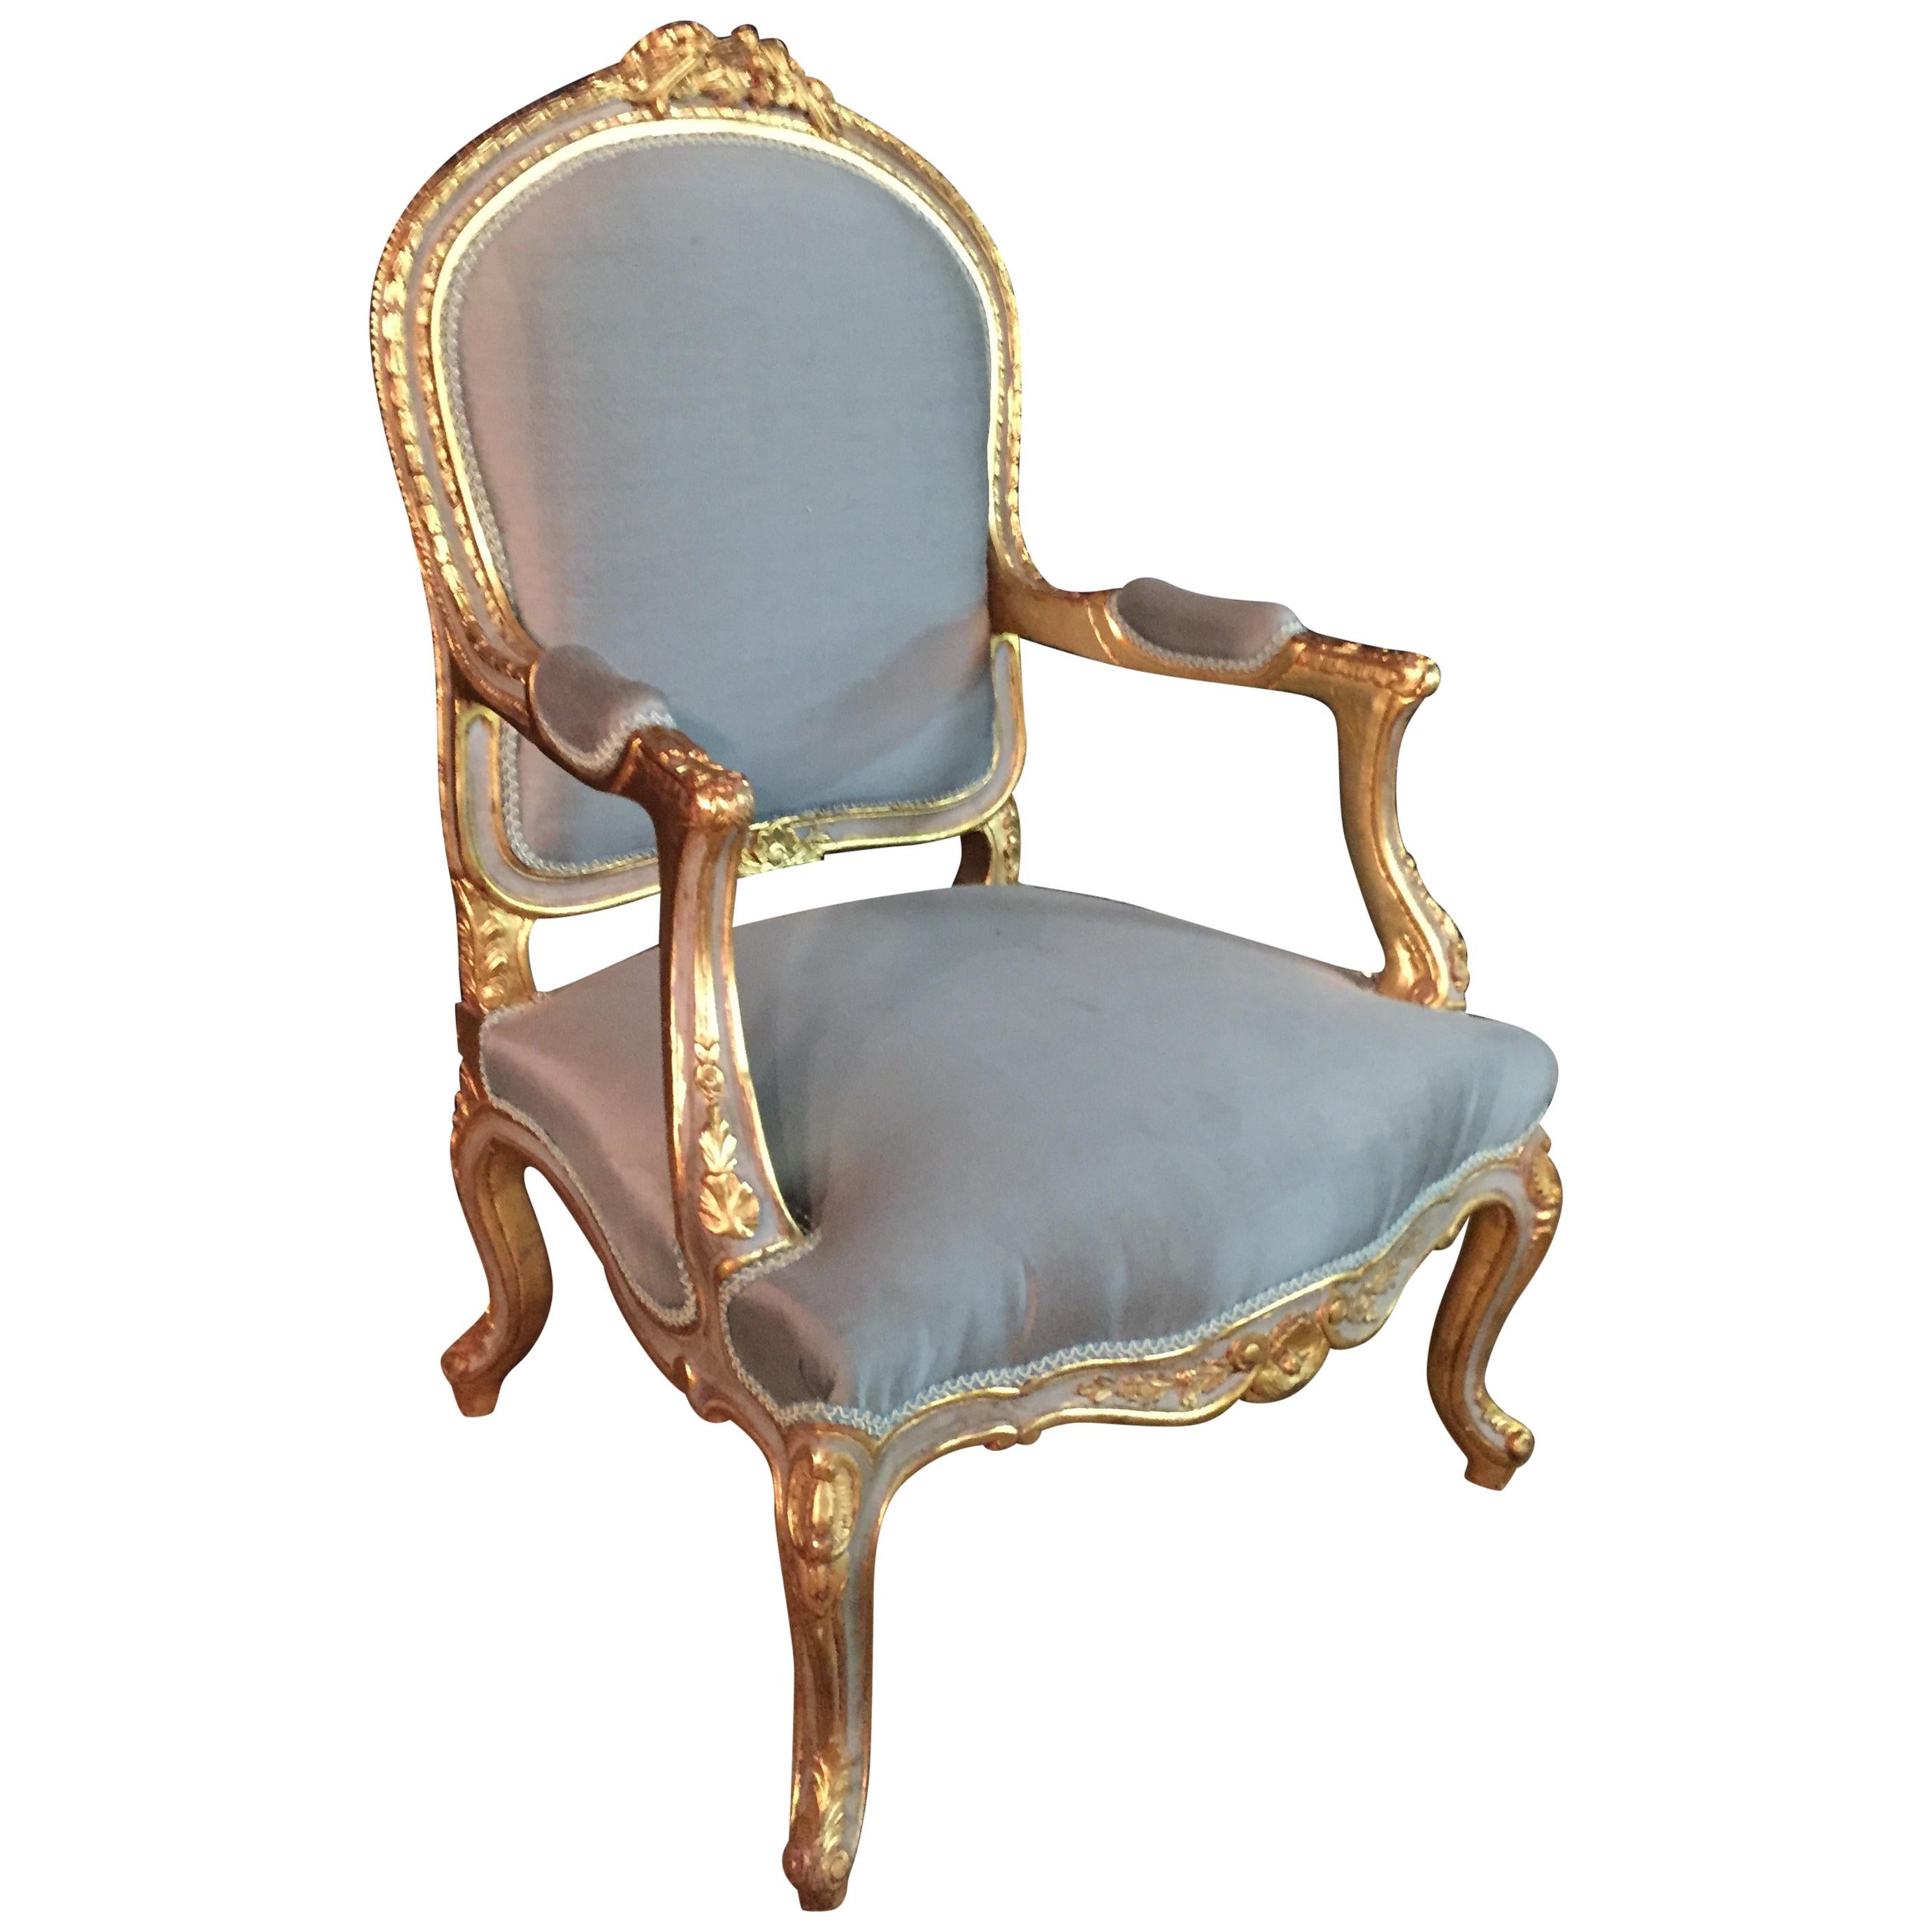 Unique French Armchair in Louis Quinze Style